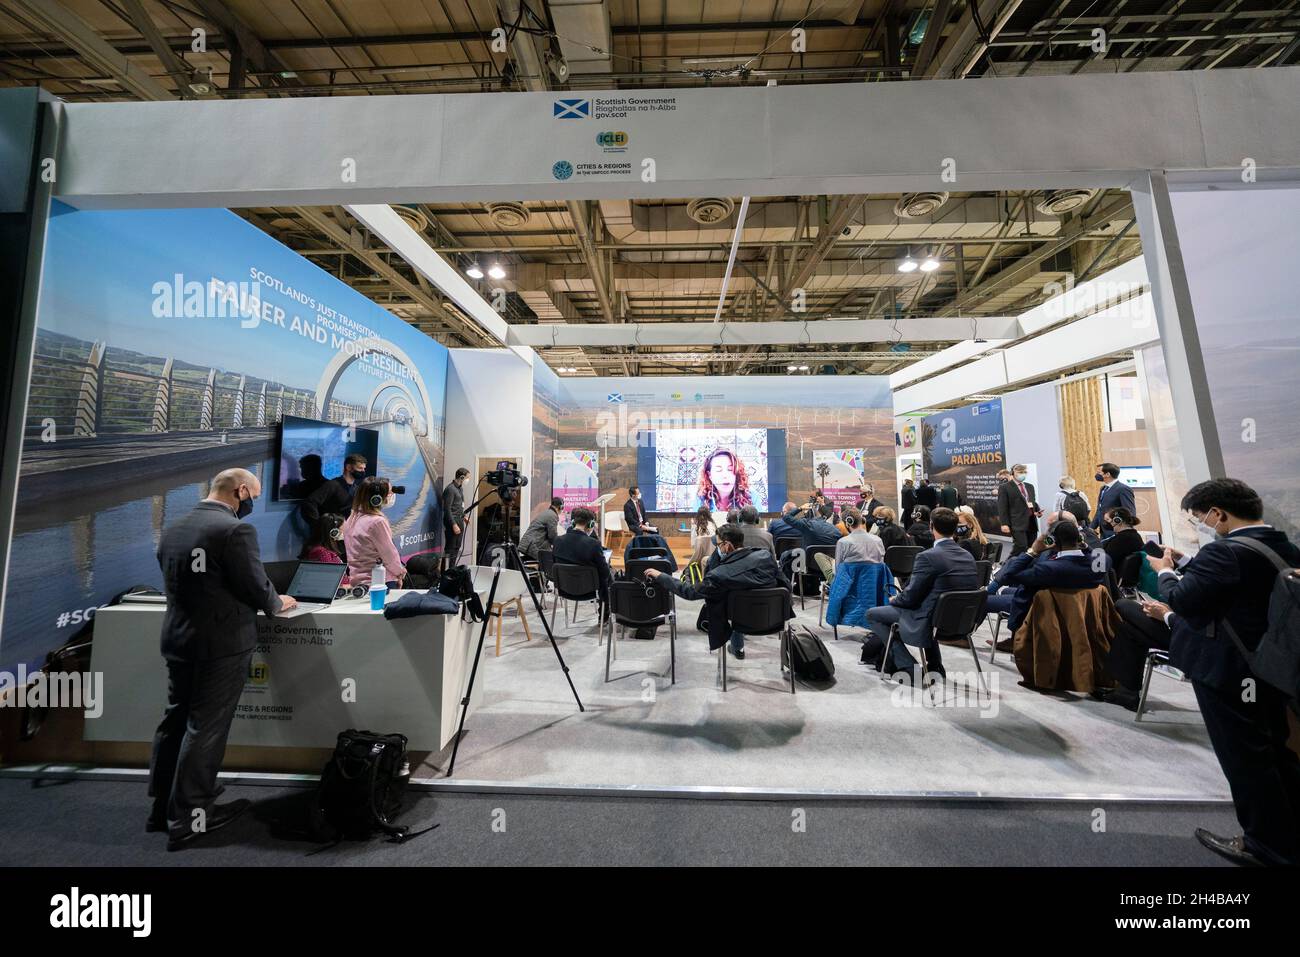 Glasgow, Scotland, UK. 1st November 2021. Images from Monday at the UN climate change conference in Glasgow. Pic; Scottish Government pavilion . Iain Masterton/Alamy Live News. Stock Photo